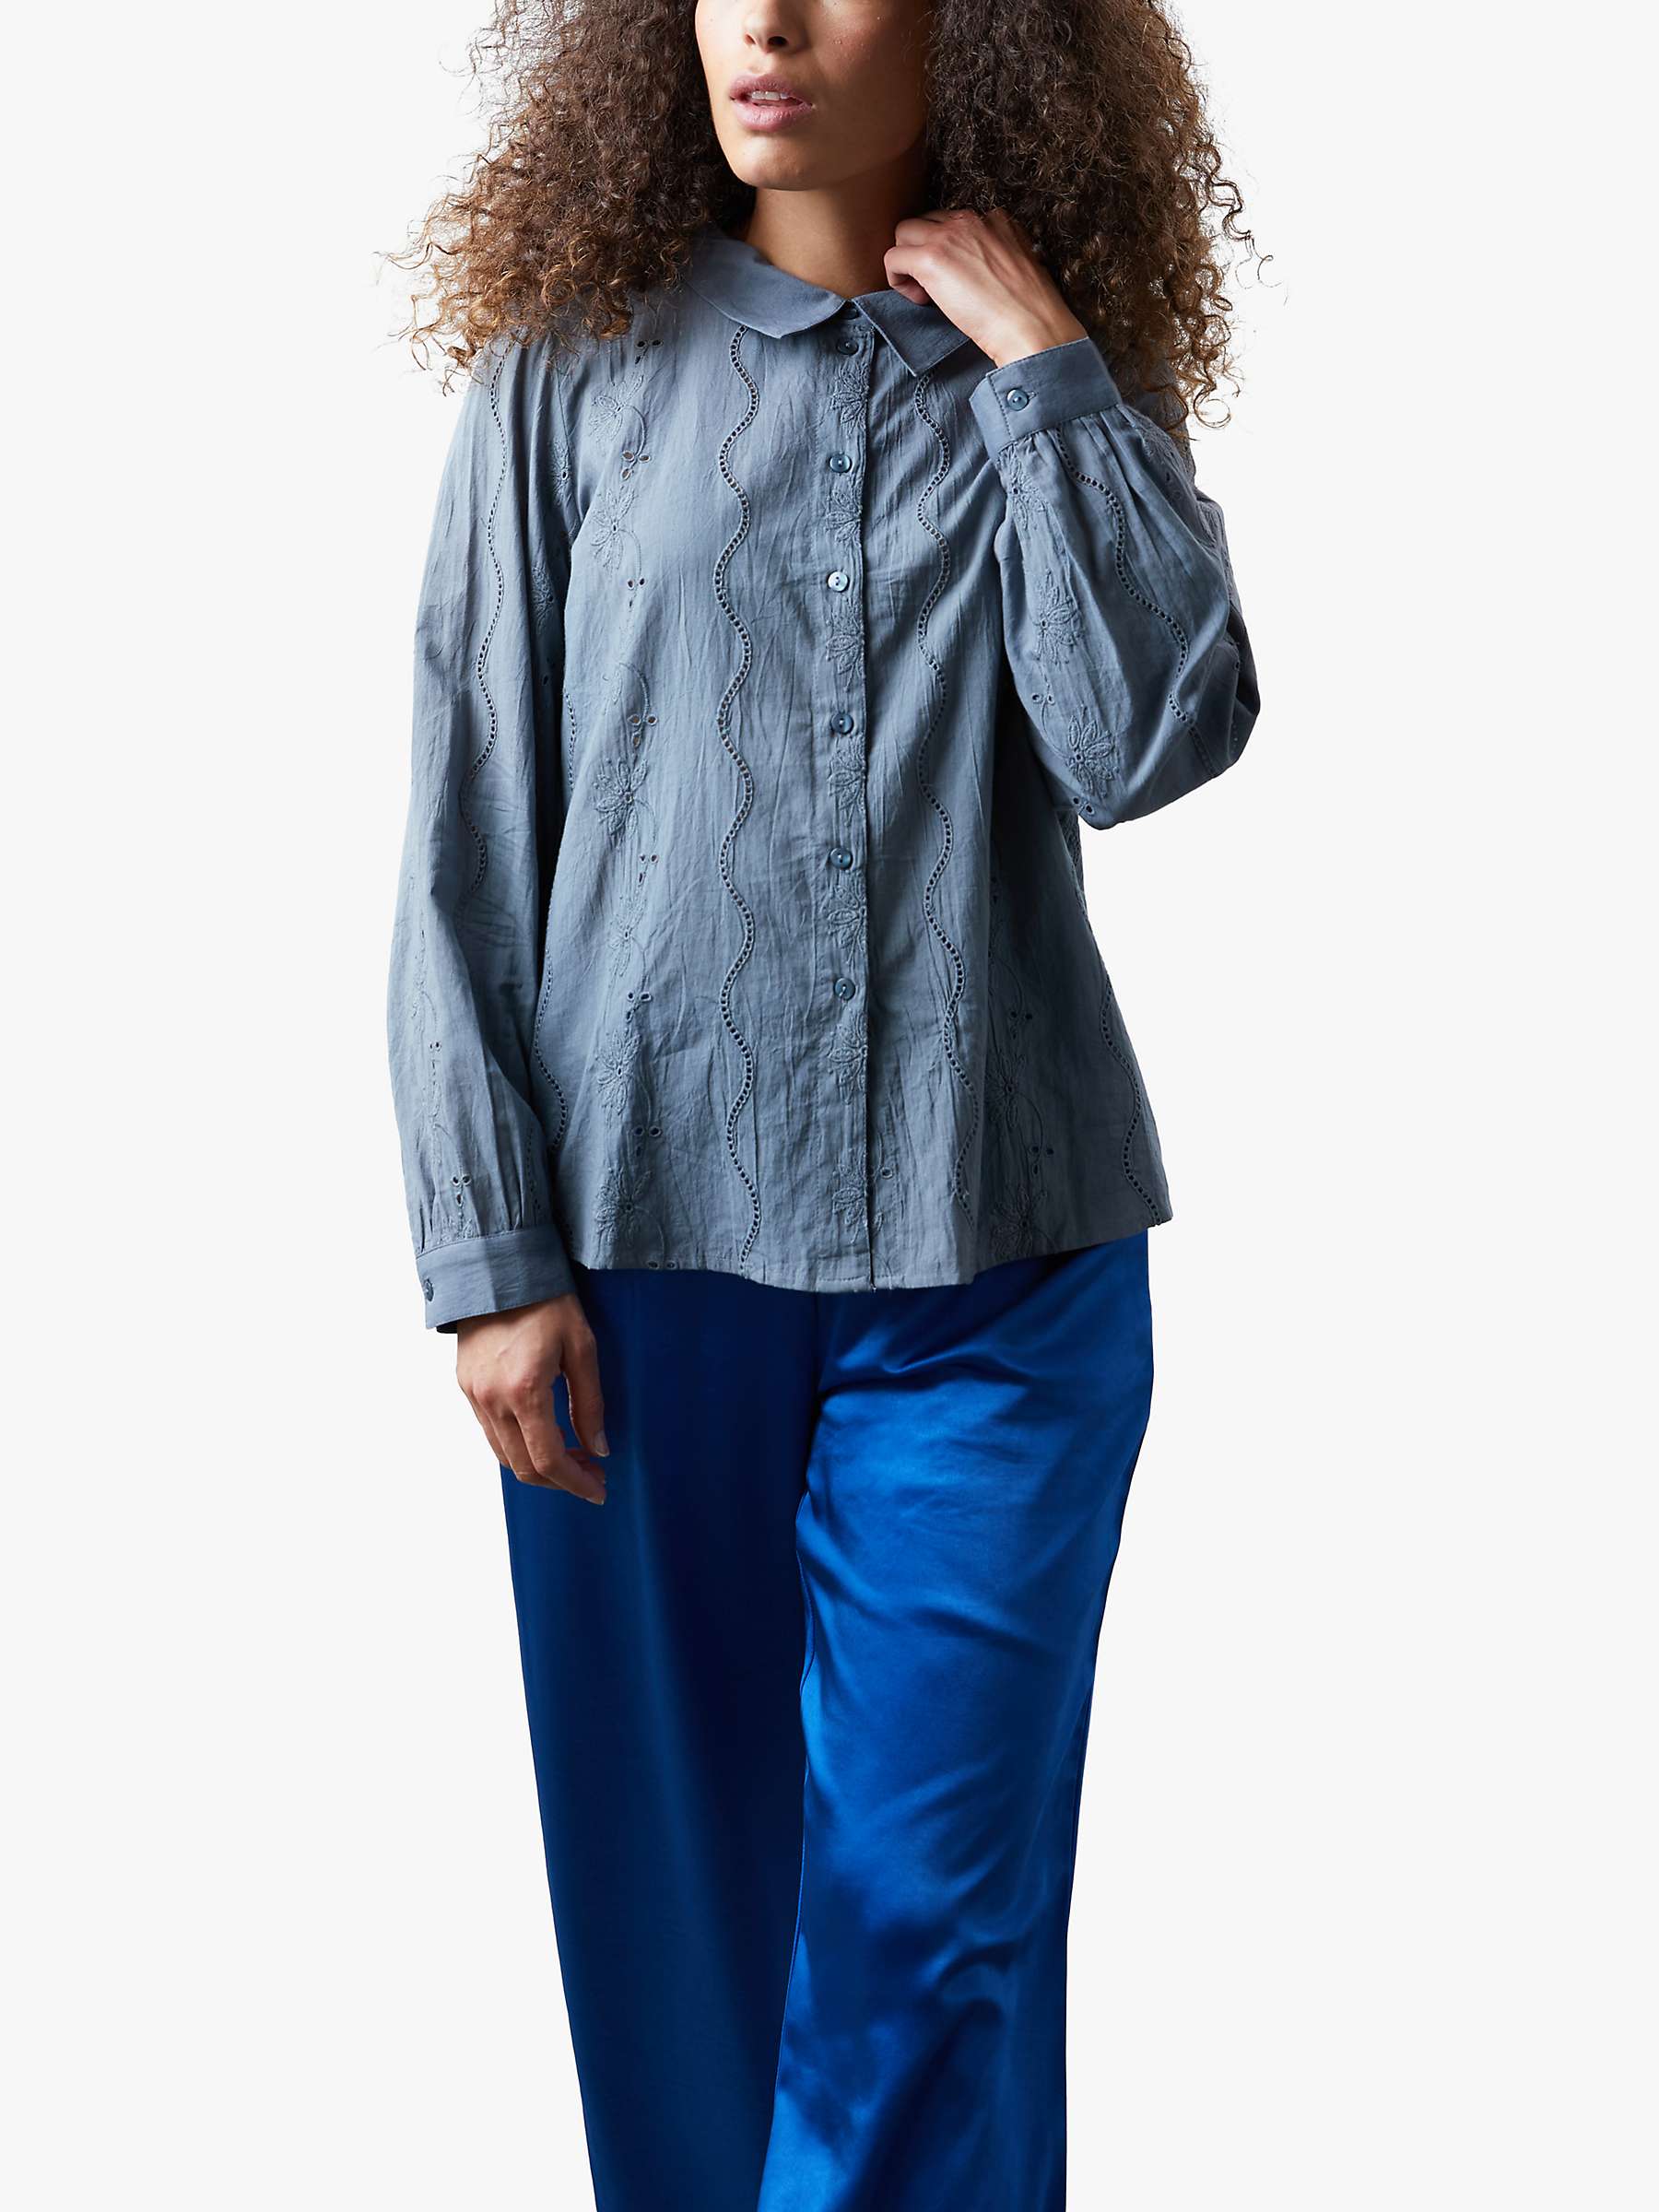 Buy Lollys Laundry Sisu Cotton Embroidered Shirt Online at johnlewis.com